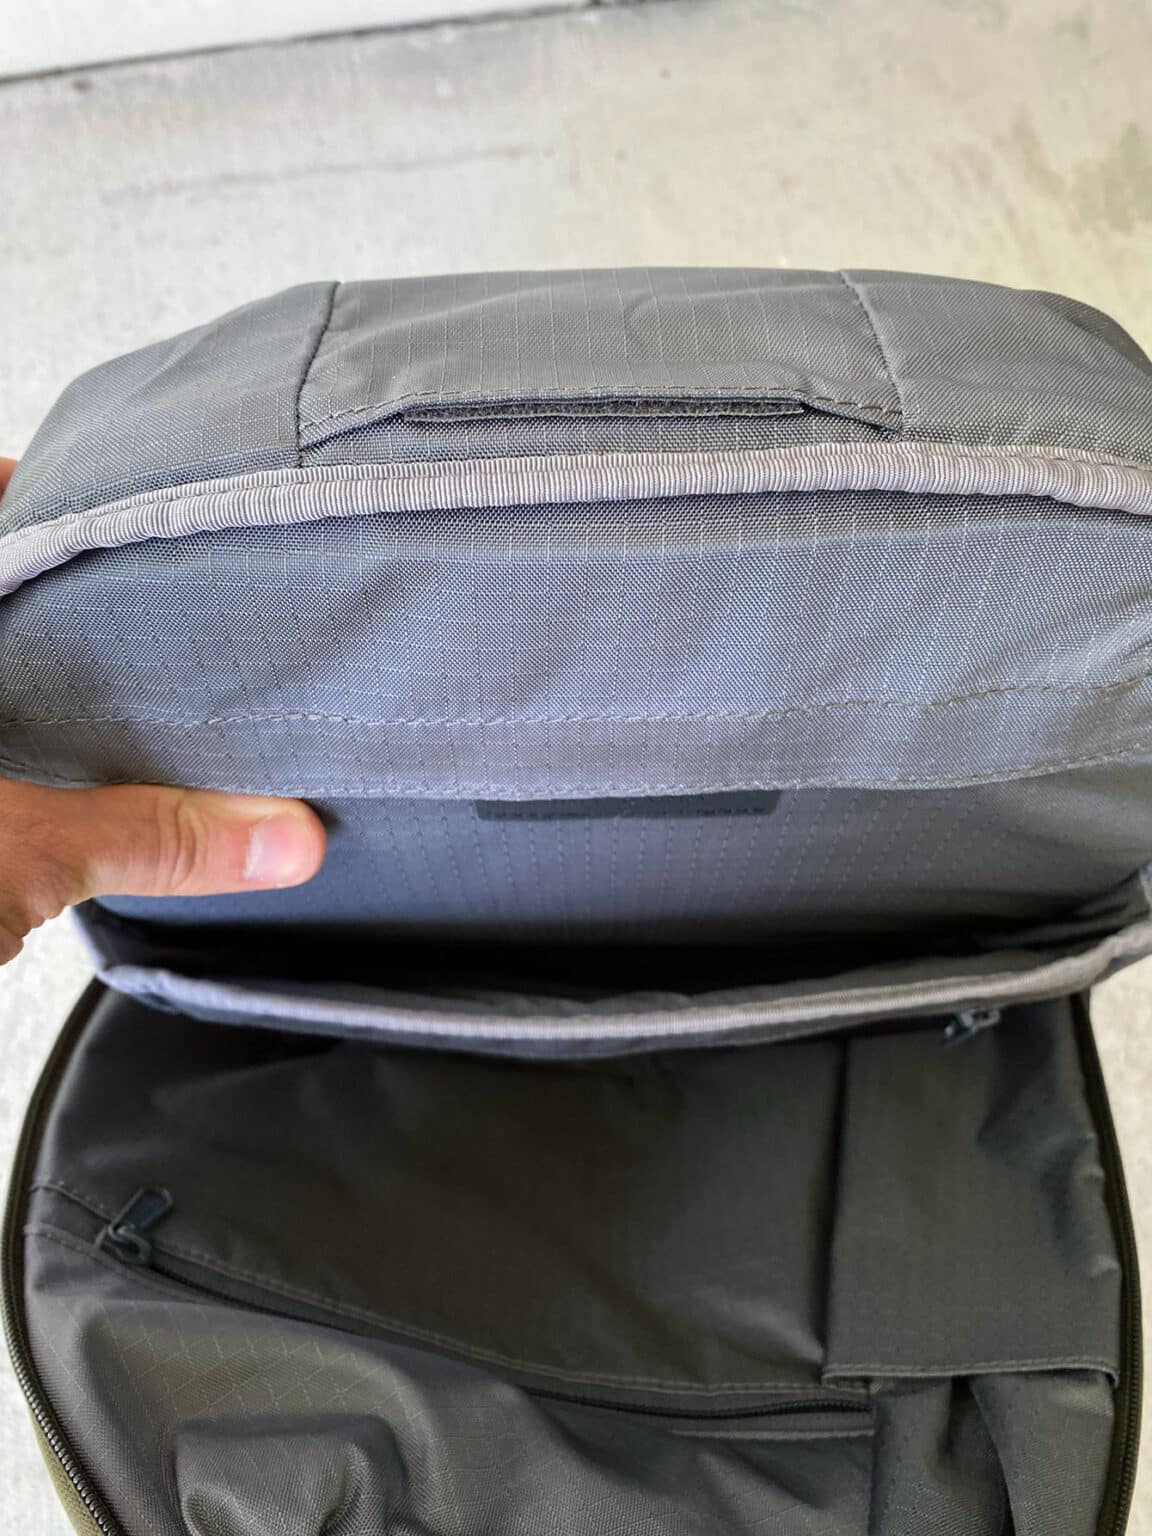 Able Carry Daily Backpack Review: Overhyped or Just Right?